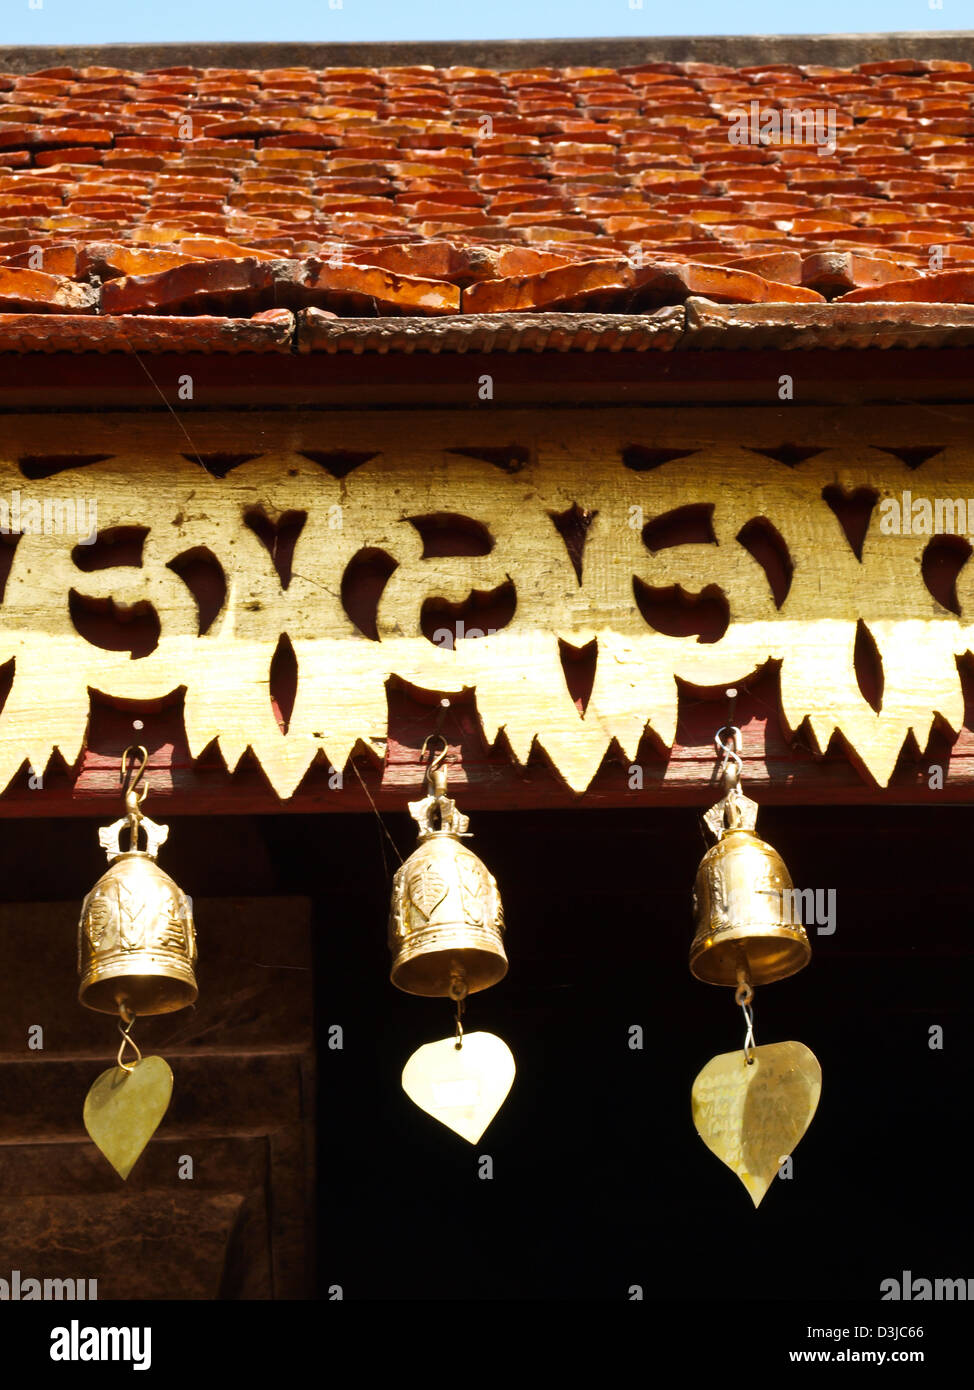 Golden bells in Buddhist place of worship in Chiang mai, Thailand Stock Photo